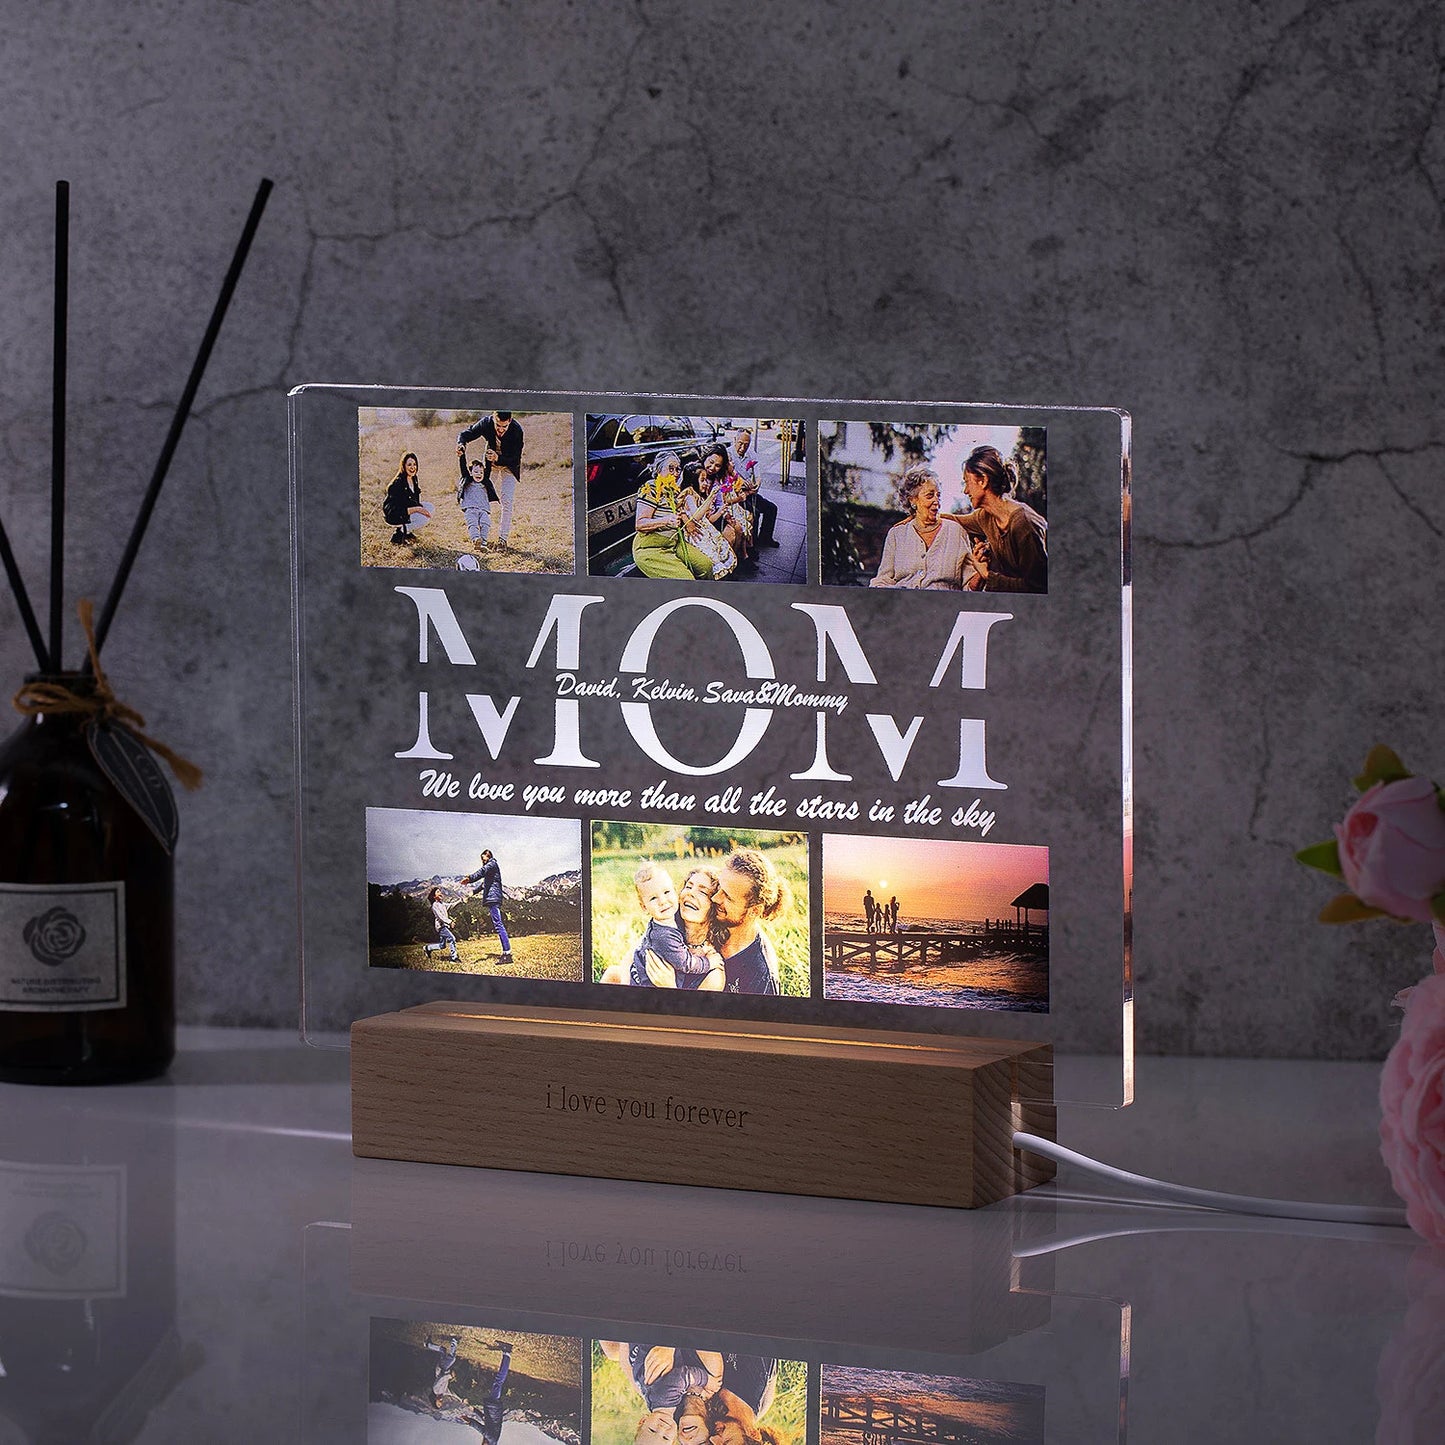 Custom Acrylic Lamp Personalized Photo Text Bedroom Night Light for MOM DAD LOVE Friend Family Day Wedding Birthday Gift Present